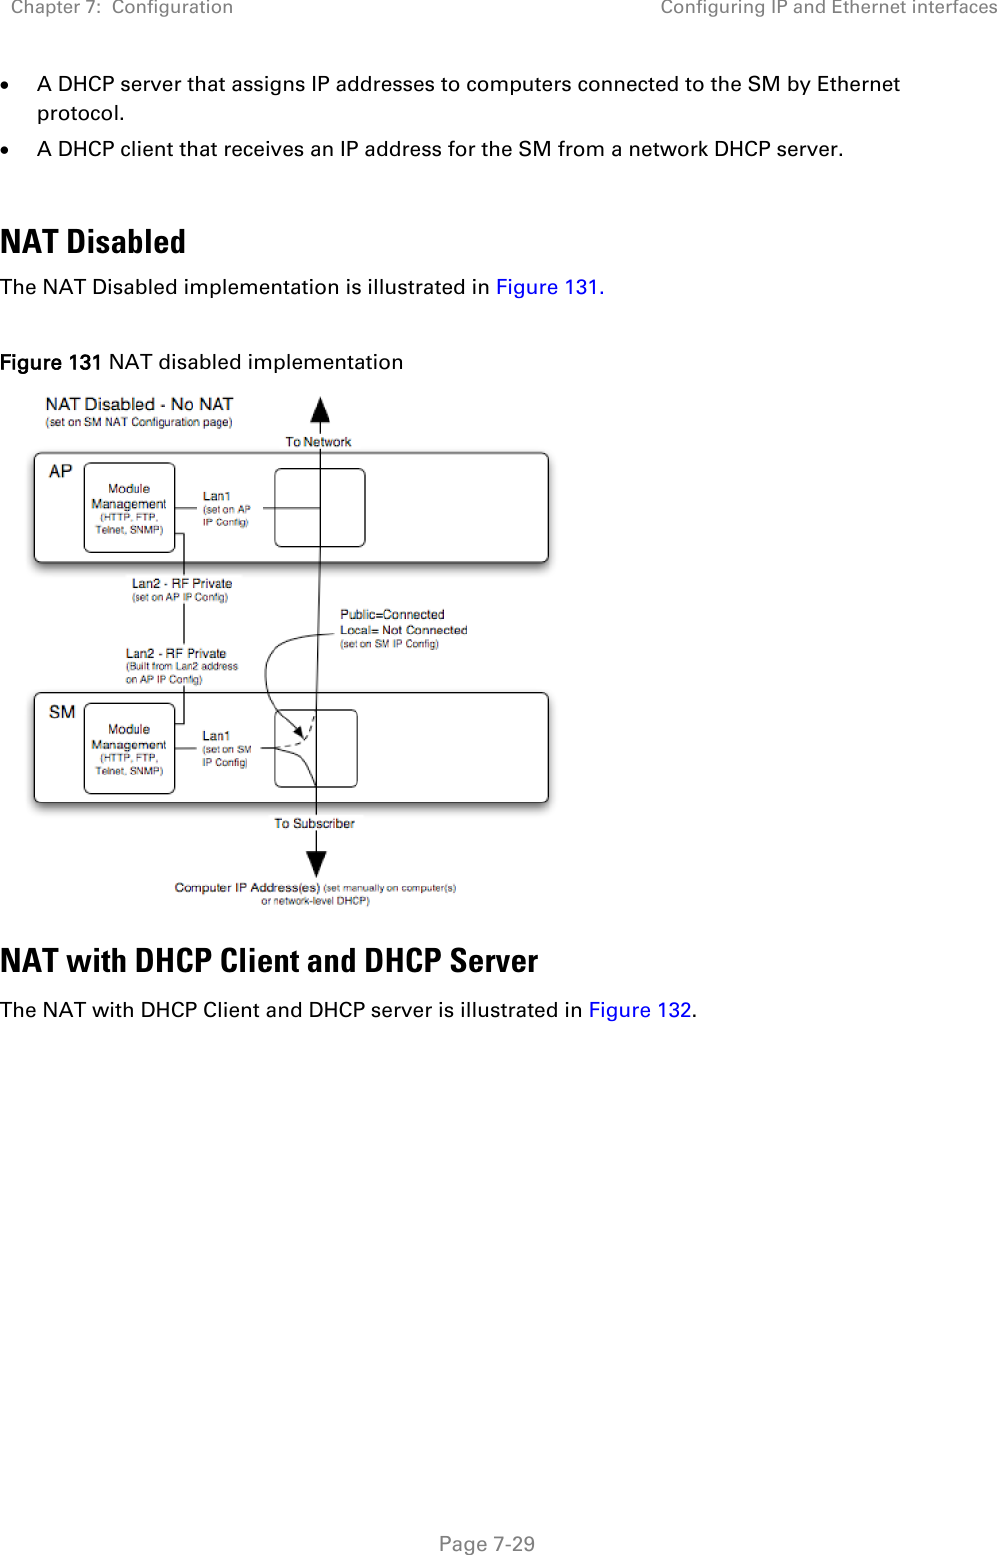 Chapter 7:  Configuration Configuring IP and Ethernet interfaces   Page 7-29 • A DHCP server that assigns IP addresses to computers connected to the SM by Ethernet protocol. • A DHCP client that receives an IP address for the SM from a network DHCP server.  NAT Disabled The NAT Disabled implementation is illustrated in Figure 131.  Figure 131 NAT disabled implementation  NAT with DHCP Client and DHCP Server The NAT with DHCP Client and DHCP server is illustrated in Figure 132. 